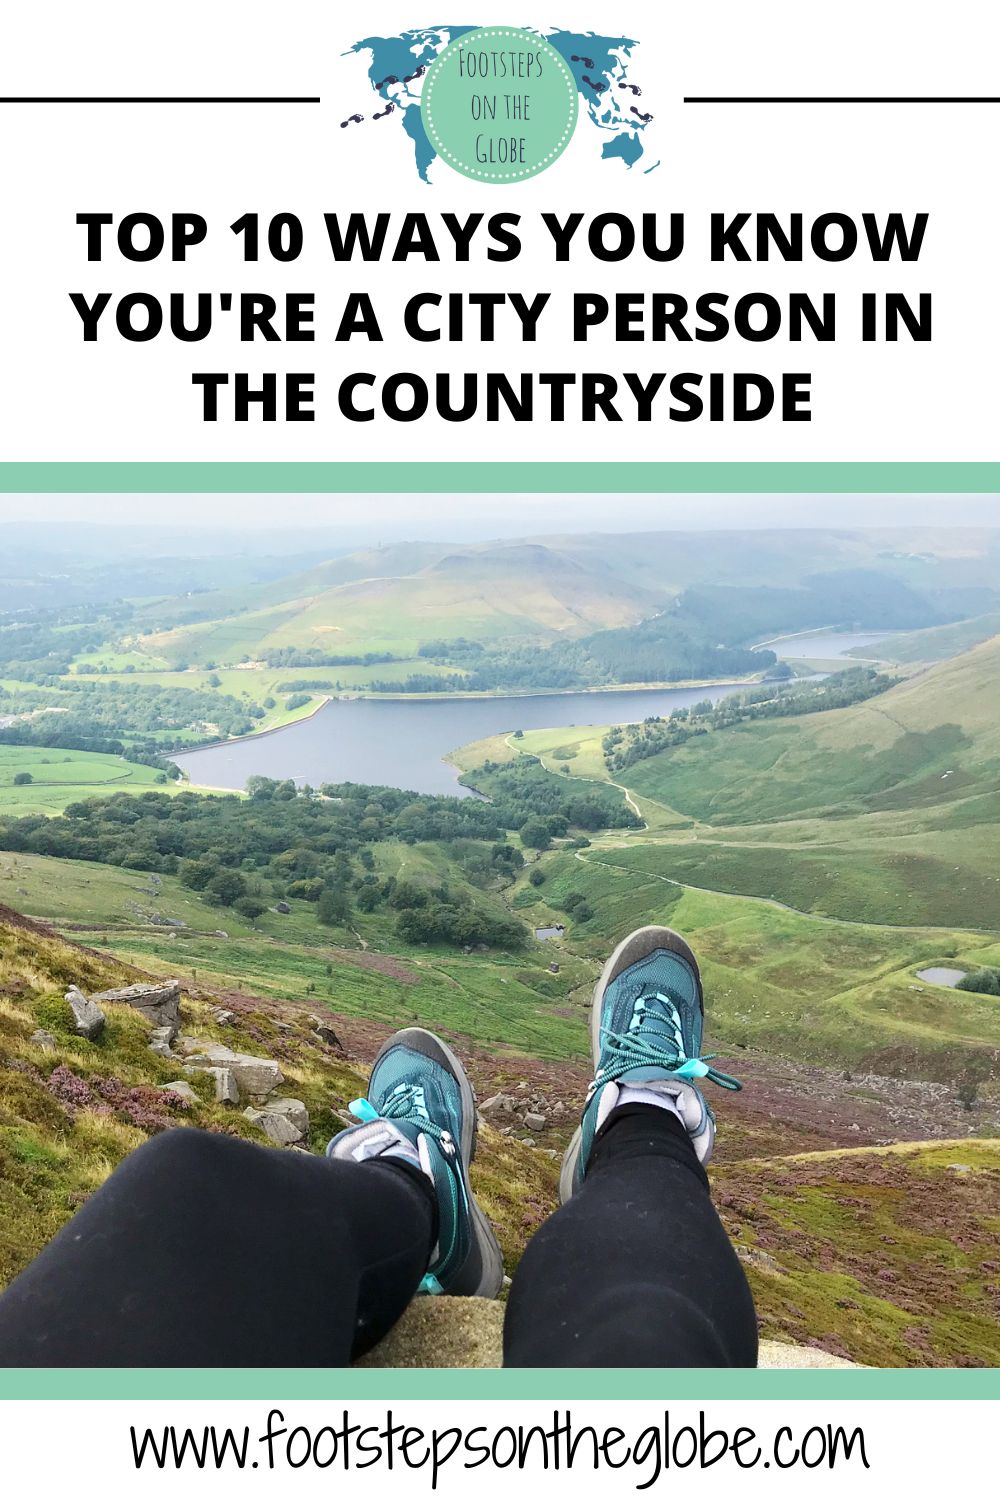 Pinterest image of some legs dangling over a high cliff wearing hiking boots with the text: "Top 10 ways you know you're a city person in the countryside"